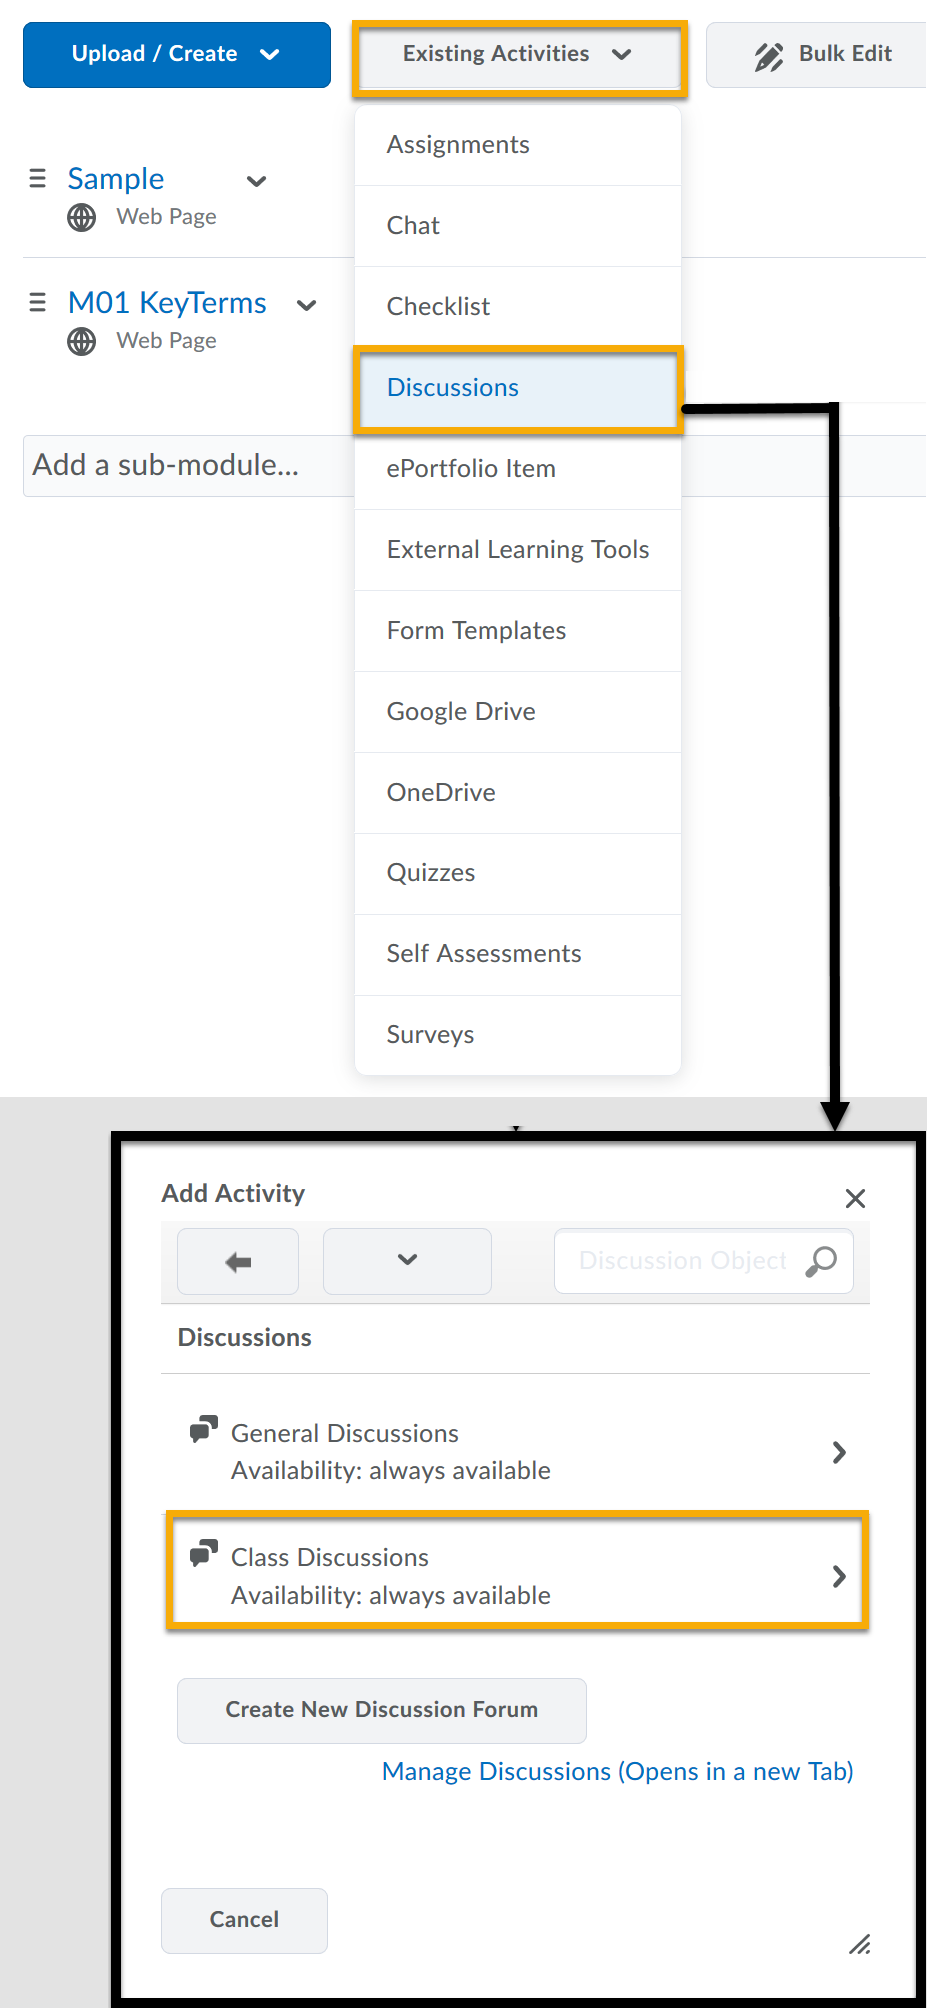 Existing Activities menu expanded to display list of options, including Discussions highlighted. Add activity dialog window with Class Discussions highlighted.